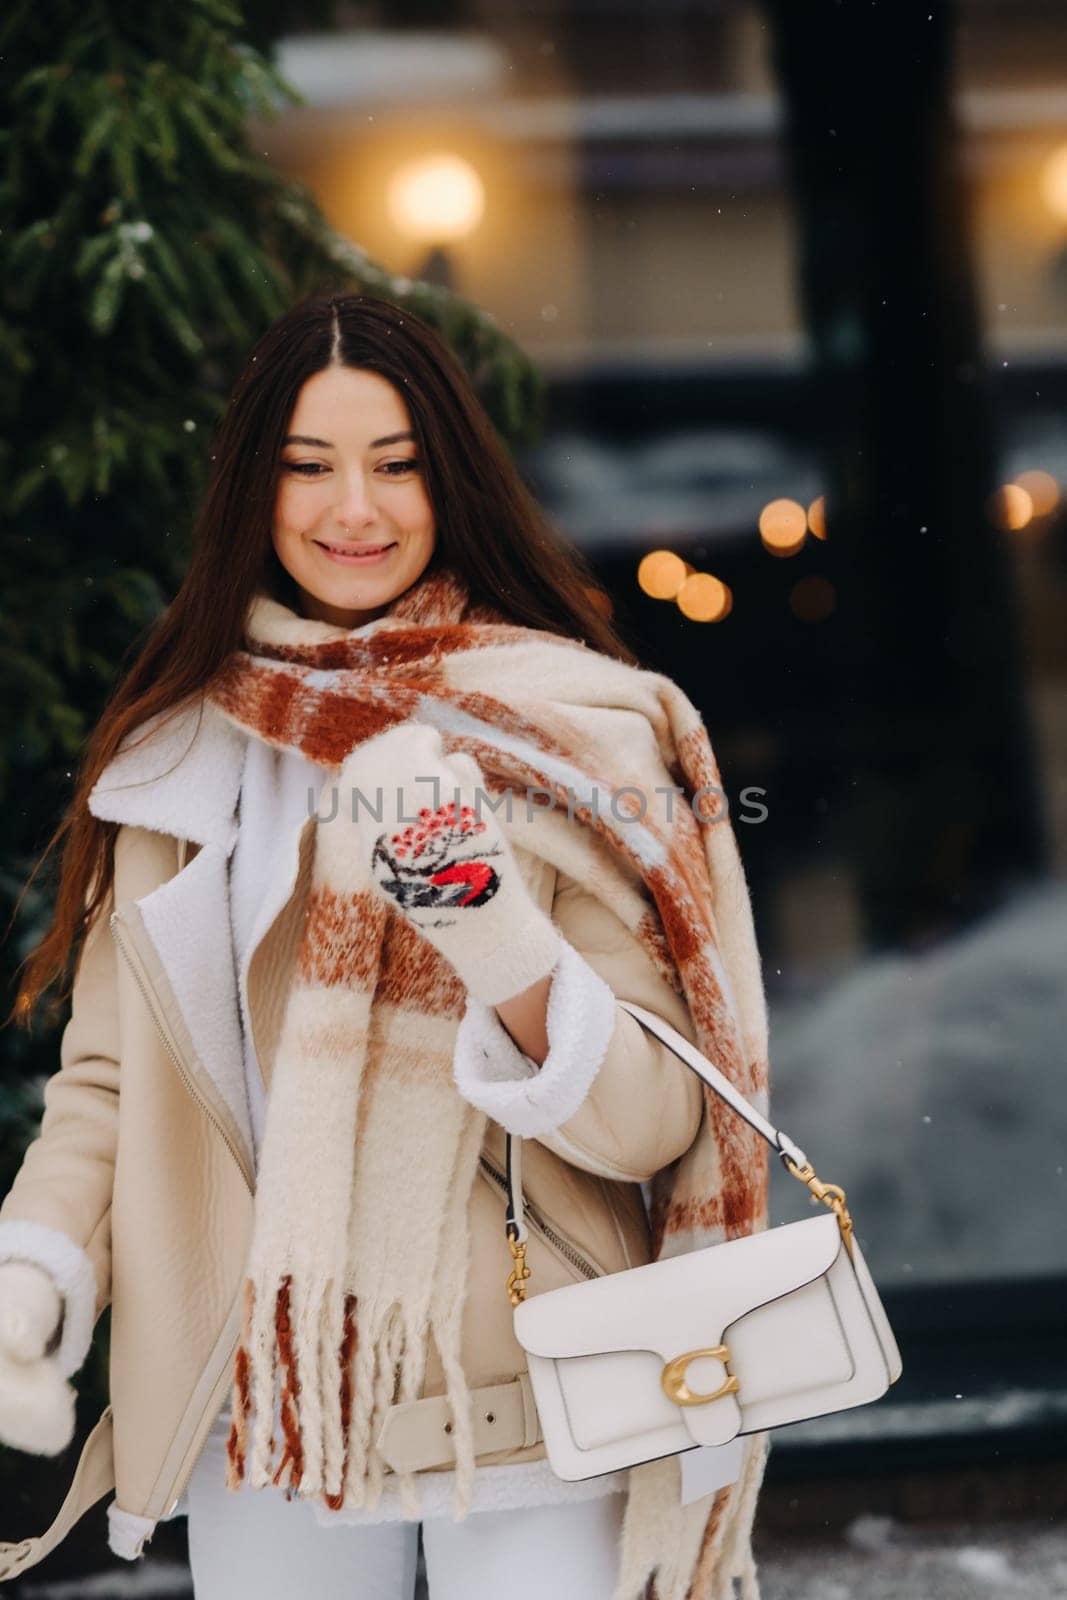 A girl with long hair in a scarf and with a white handbag walks down the street in winter by Lobachad